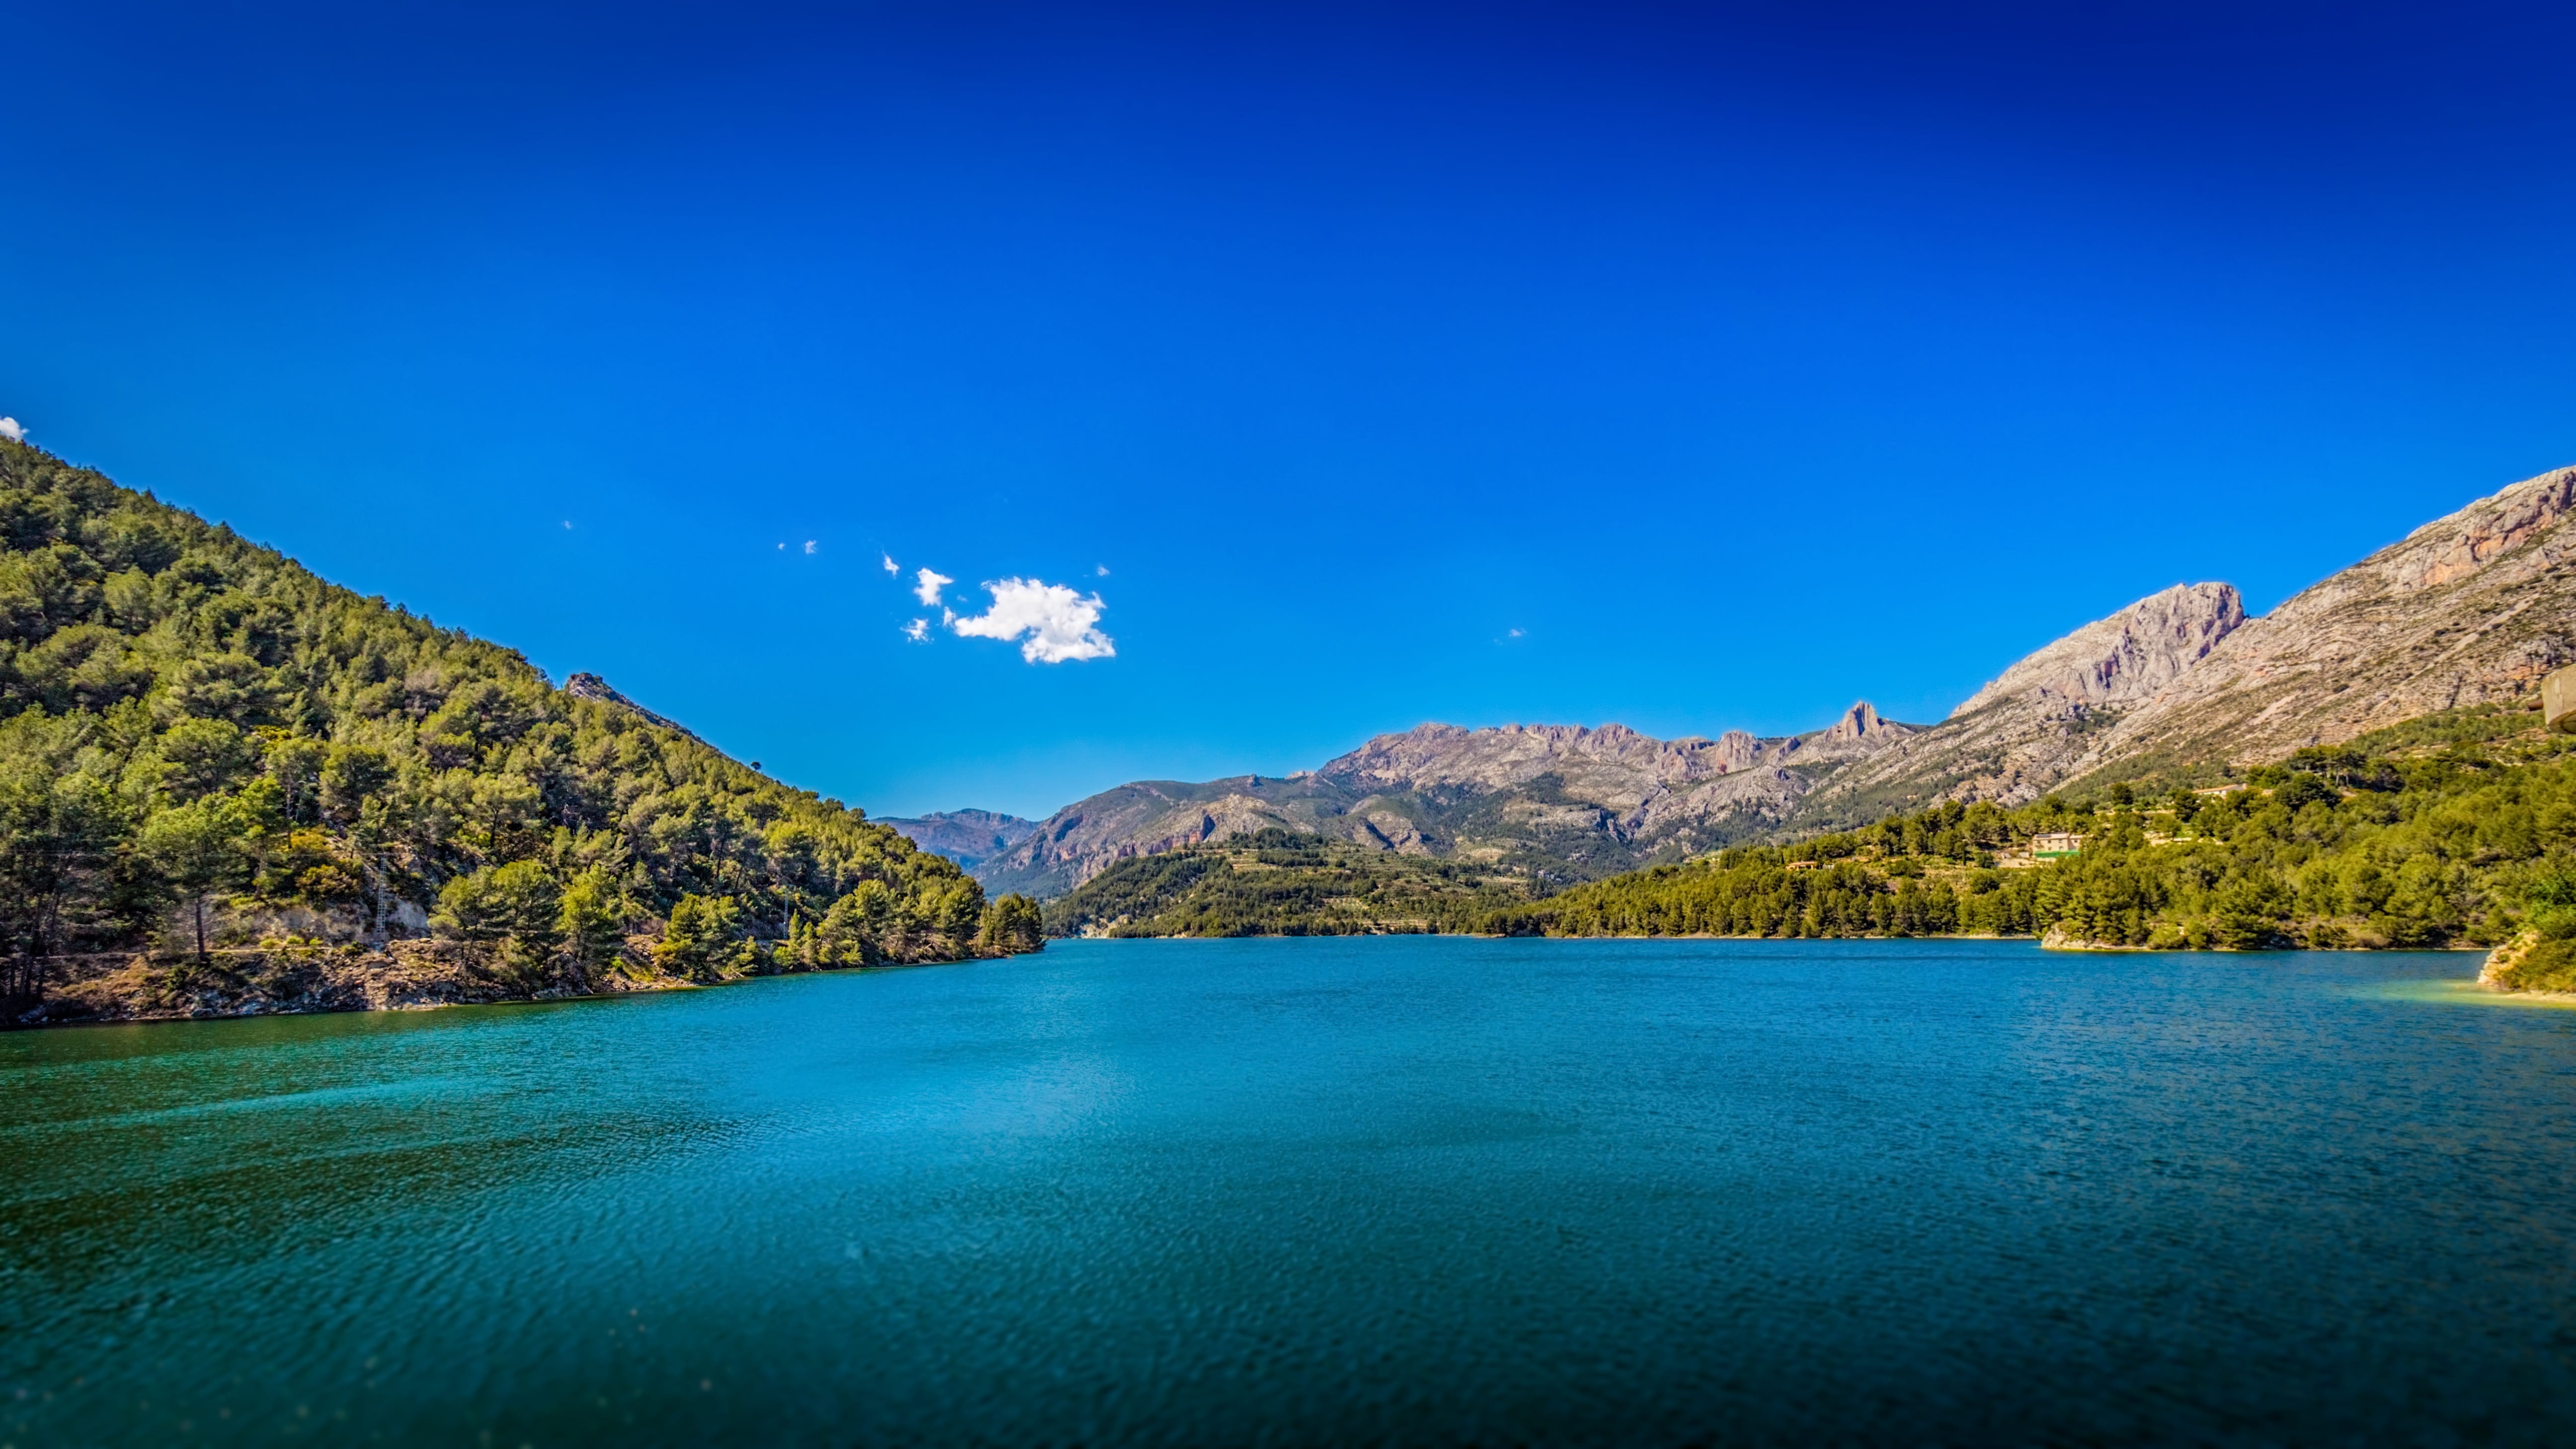 body of water and mountains, retaining lake, spain, nature, landscape